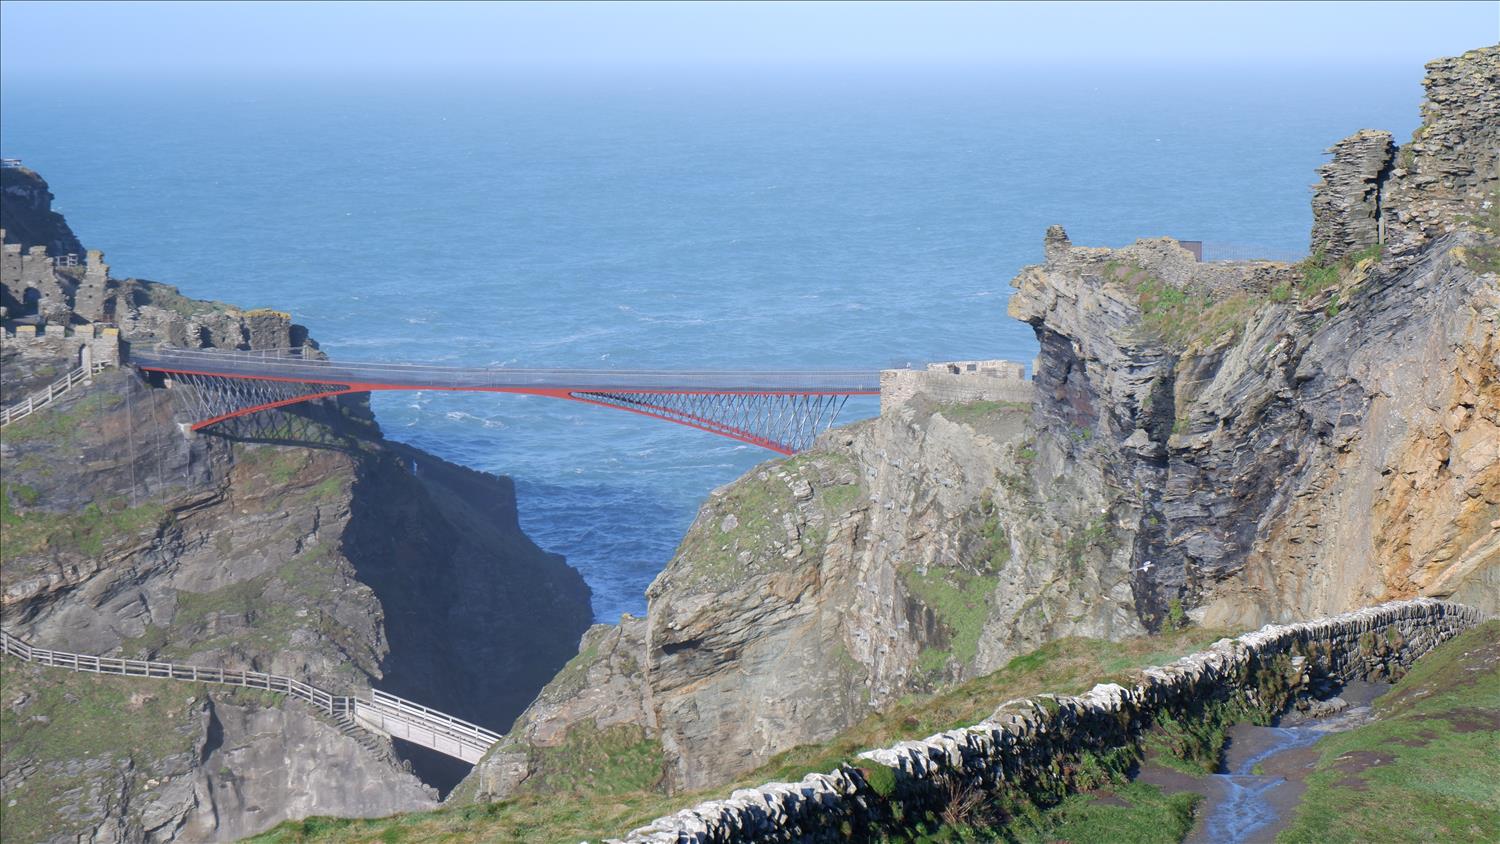 To get to the ruins of Tintagel Castle on the North Cornwall coast and hear stories of King Arthur, you have to cross a spectacular new bridge.